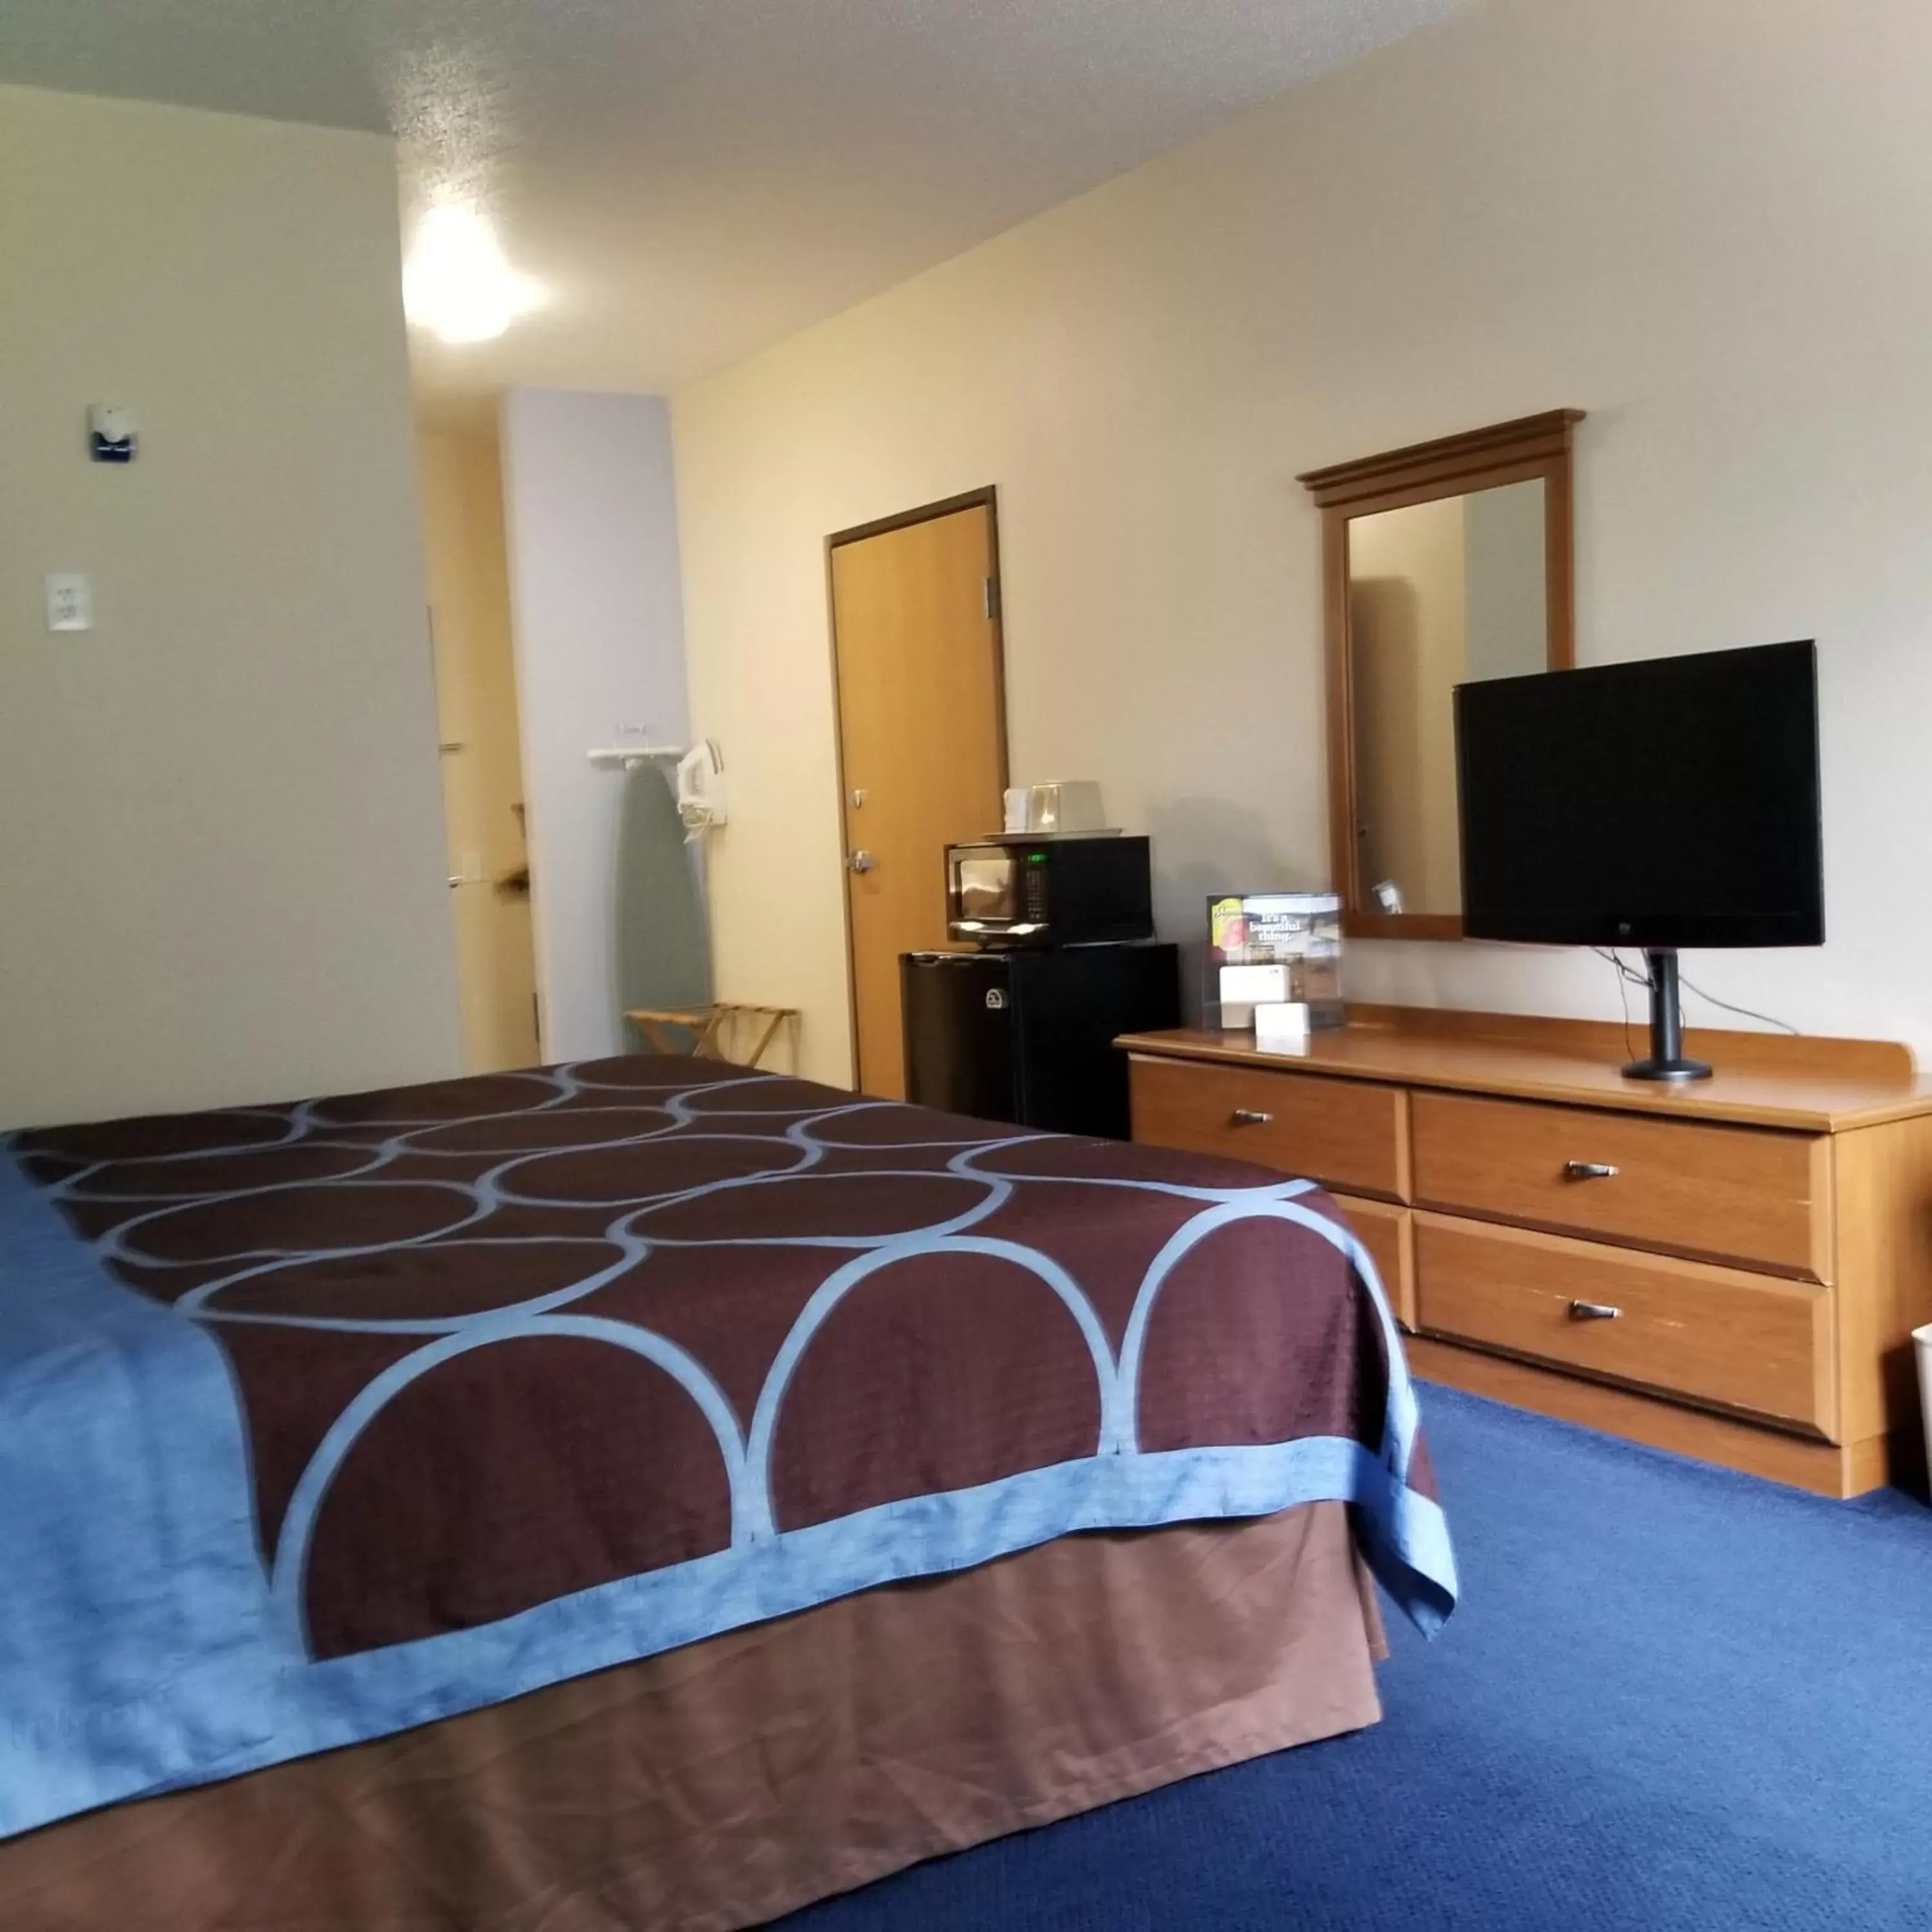 Bed in Super 8 by Wyndham Cobleskill NY